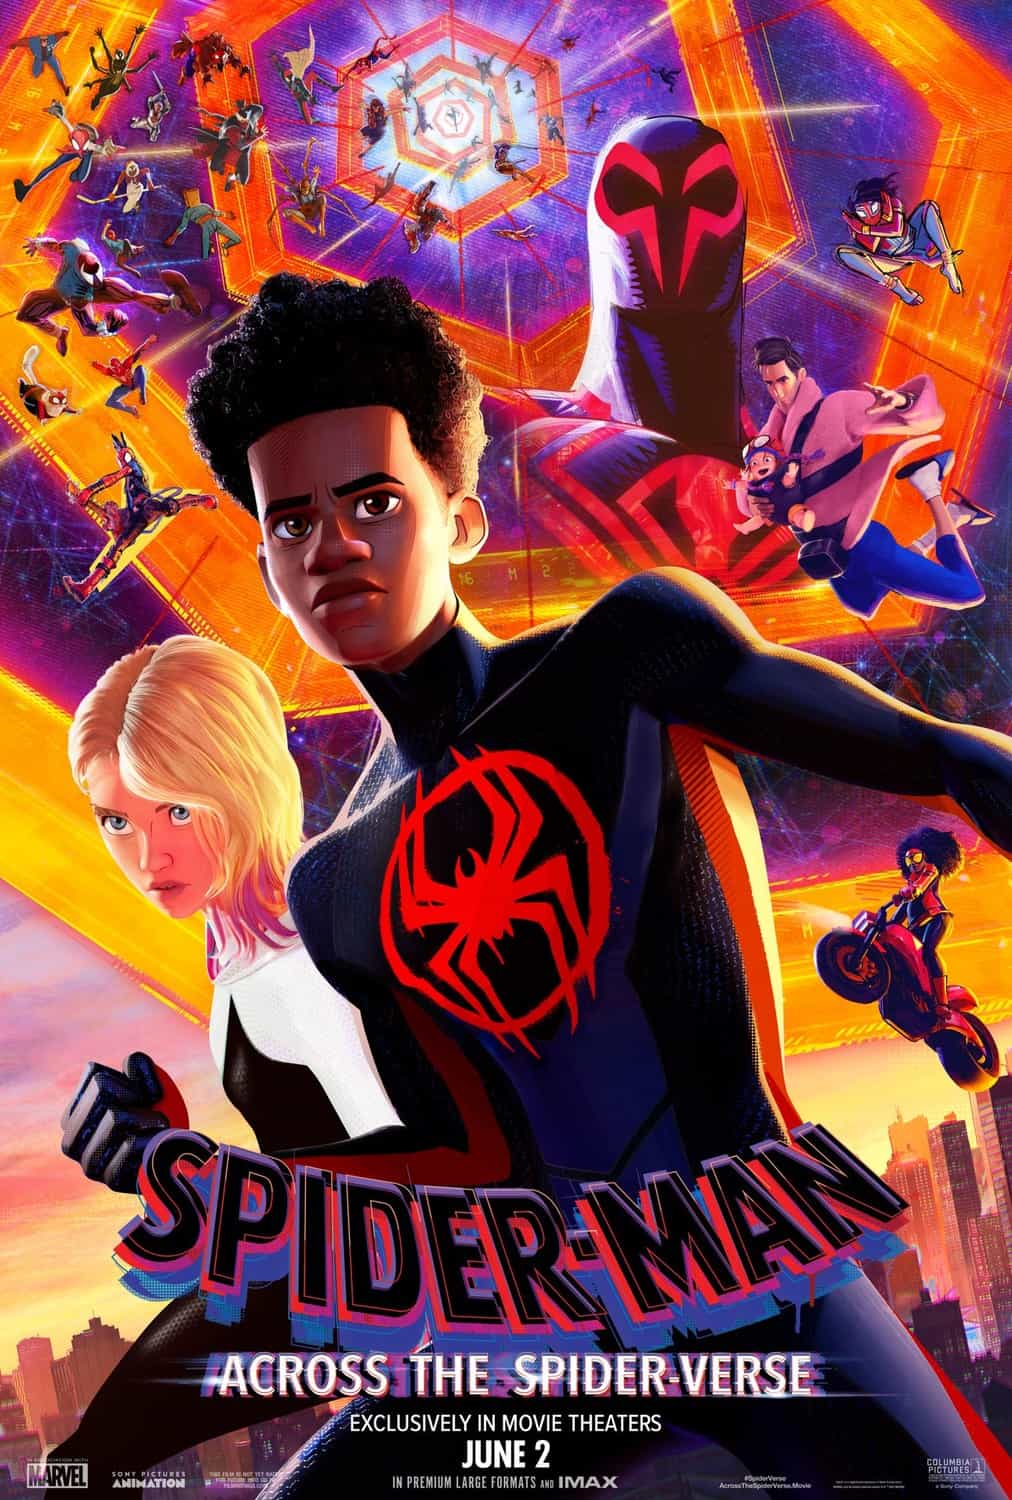 UK Box Office Weekend Report 23rd - 25th June 2023:  Spider-Man: Across the Spider-Verse goes back to the top of the UK box office with No Hard Feelings new at number 3